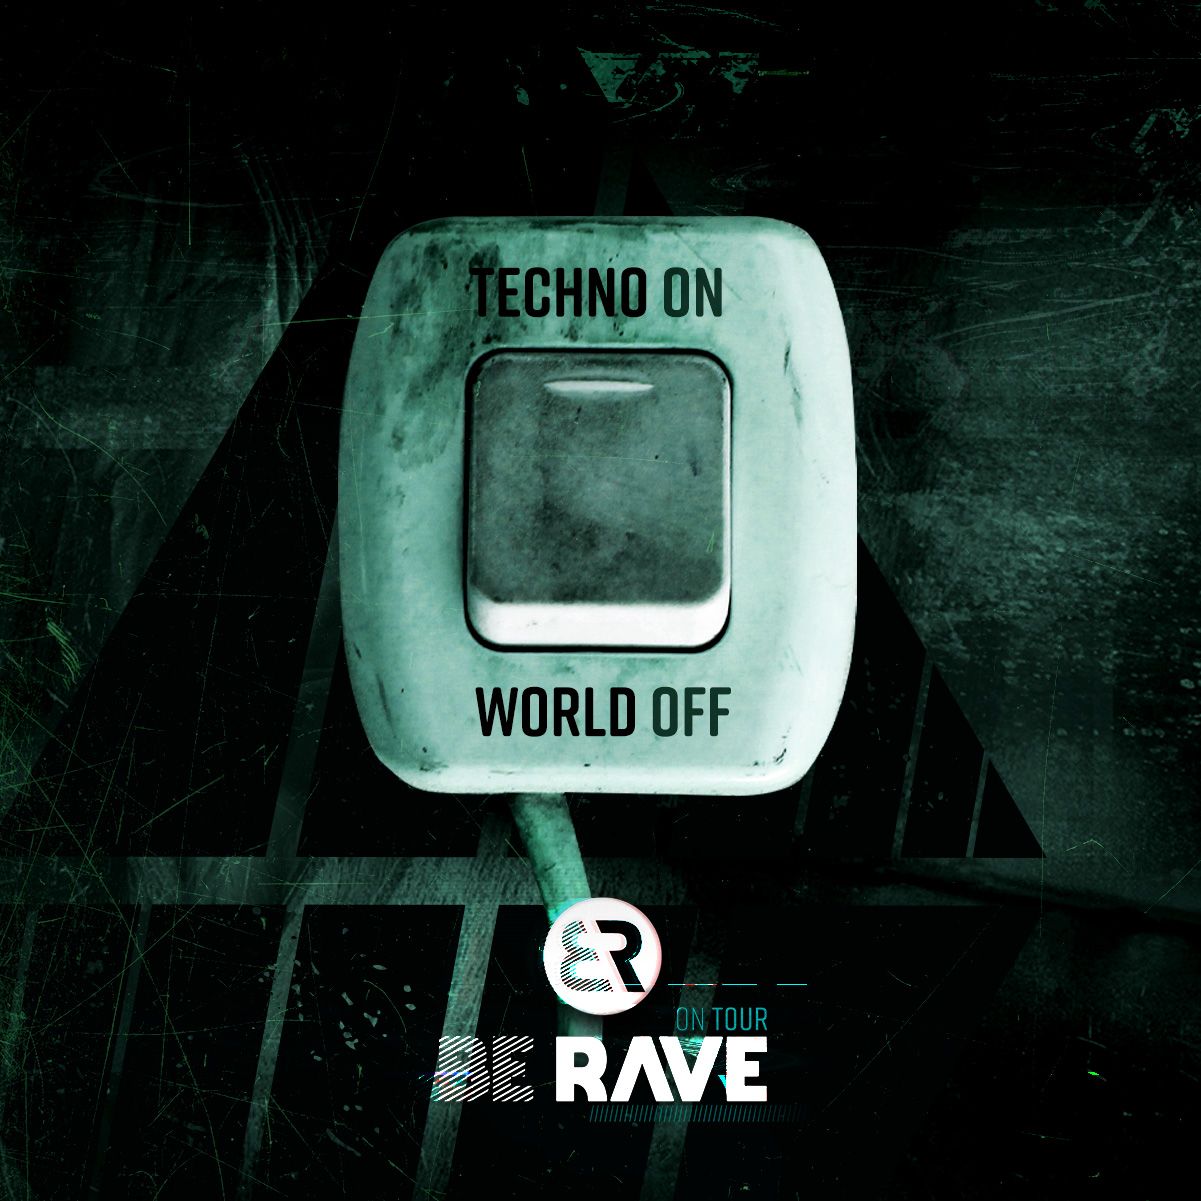 Turn the world off... switch on TECHNO!